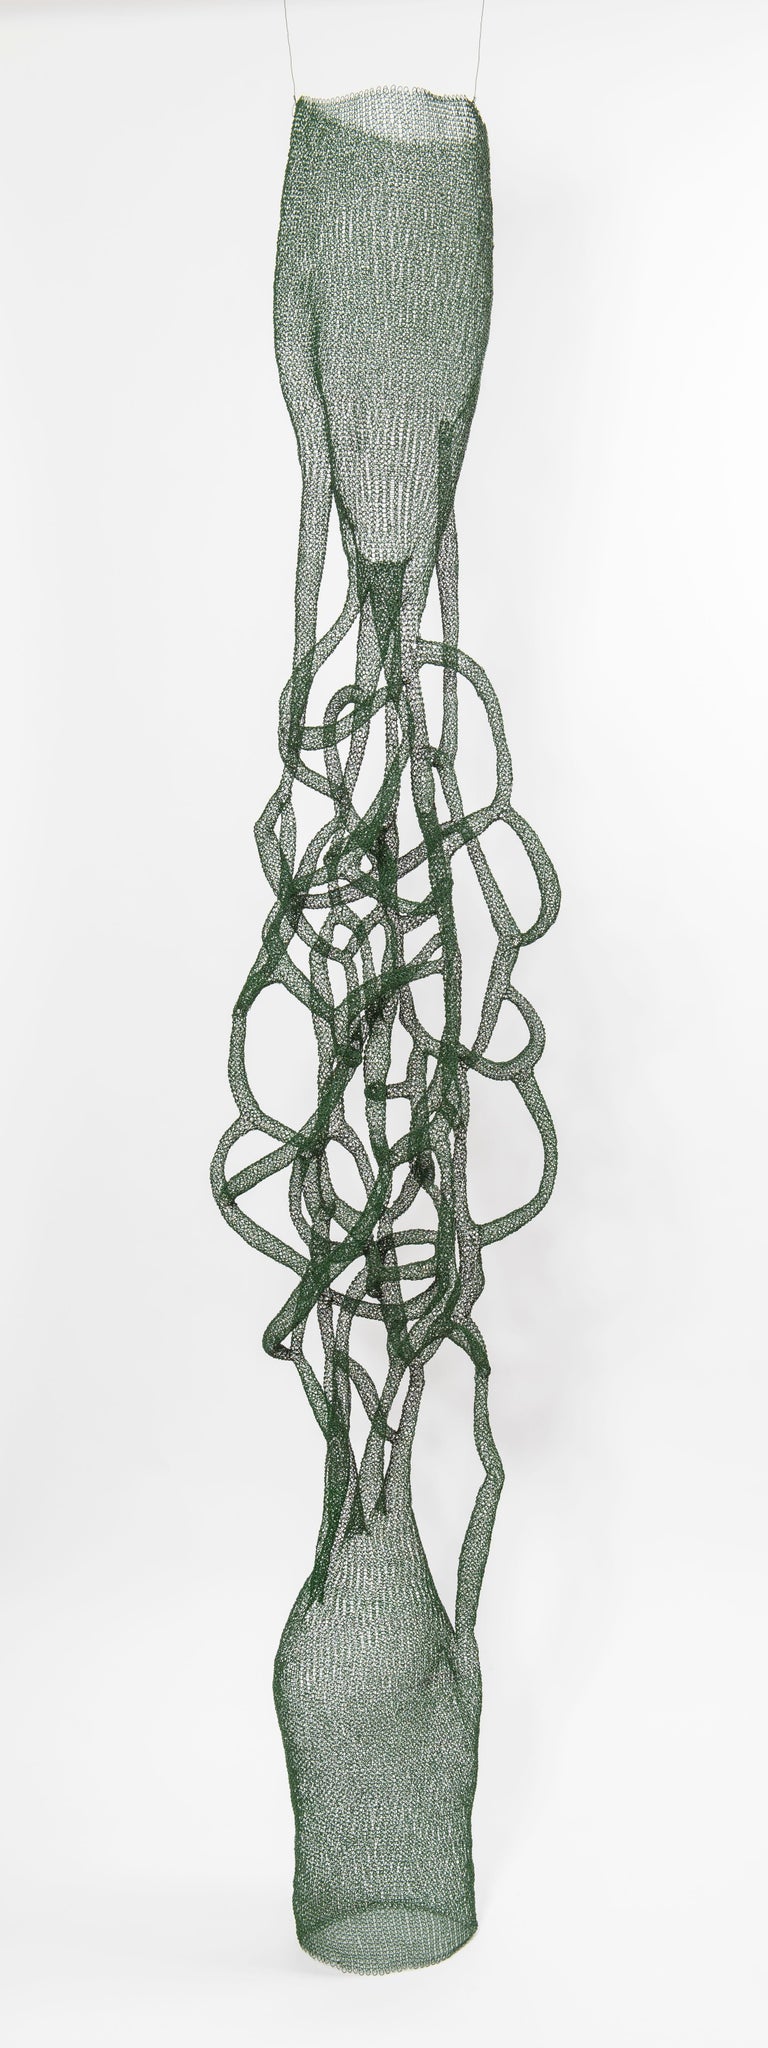 Delphine Grandvaux - In Between, Hand Knitted Airy Metal Transparent  Green Pendant Tall Sculpture For Sale at 1stDibs